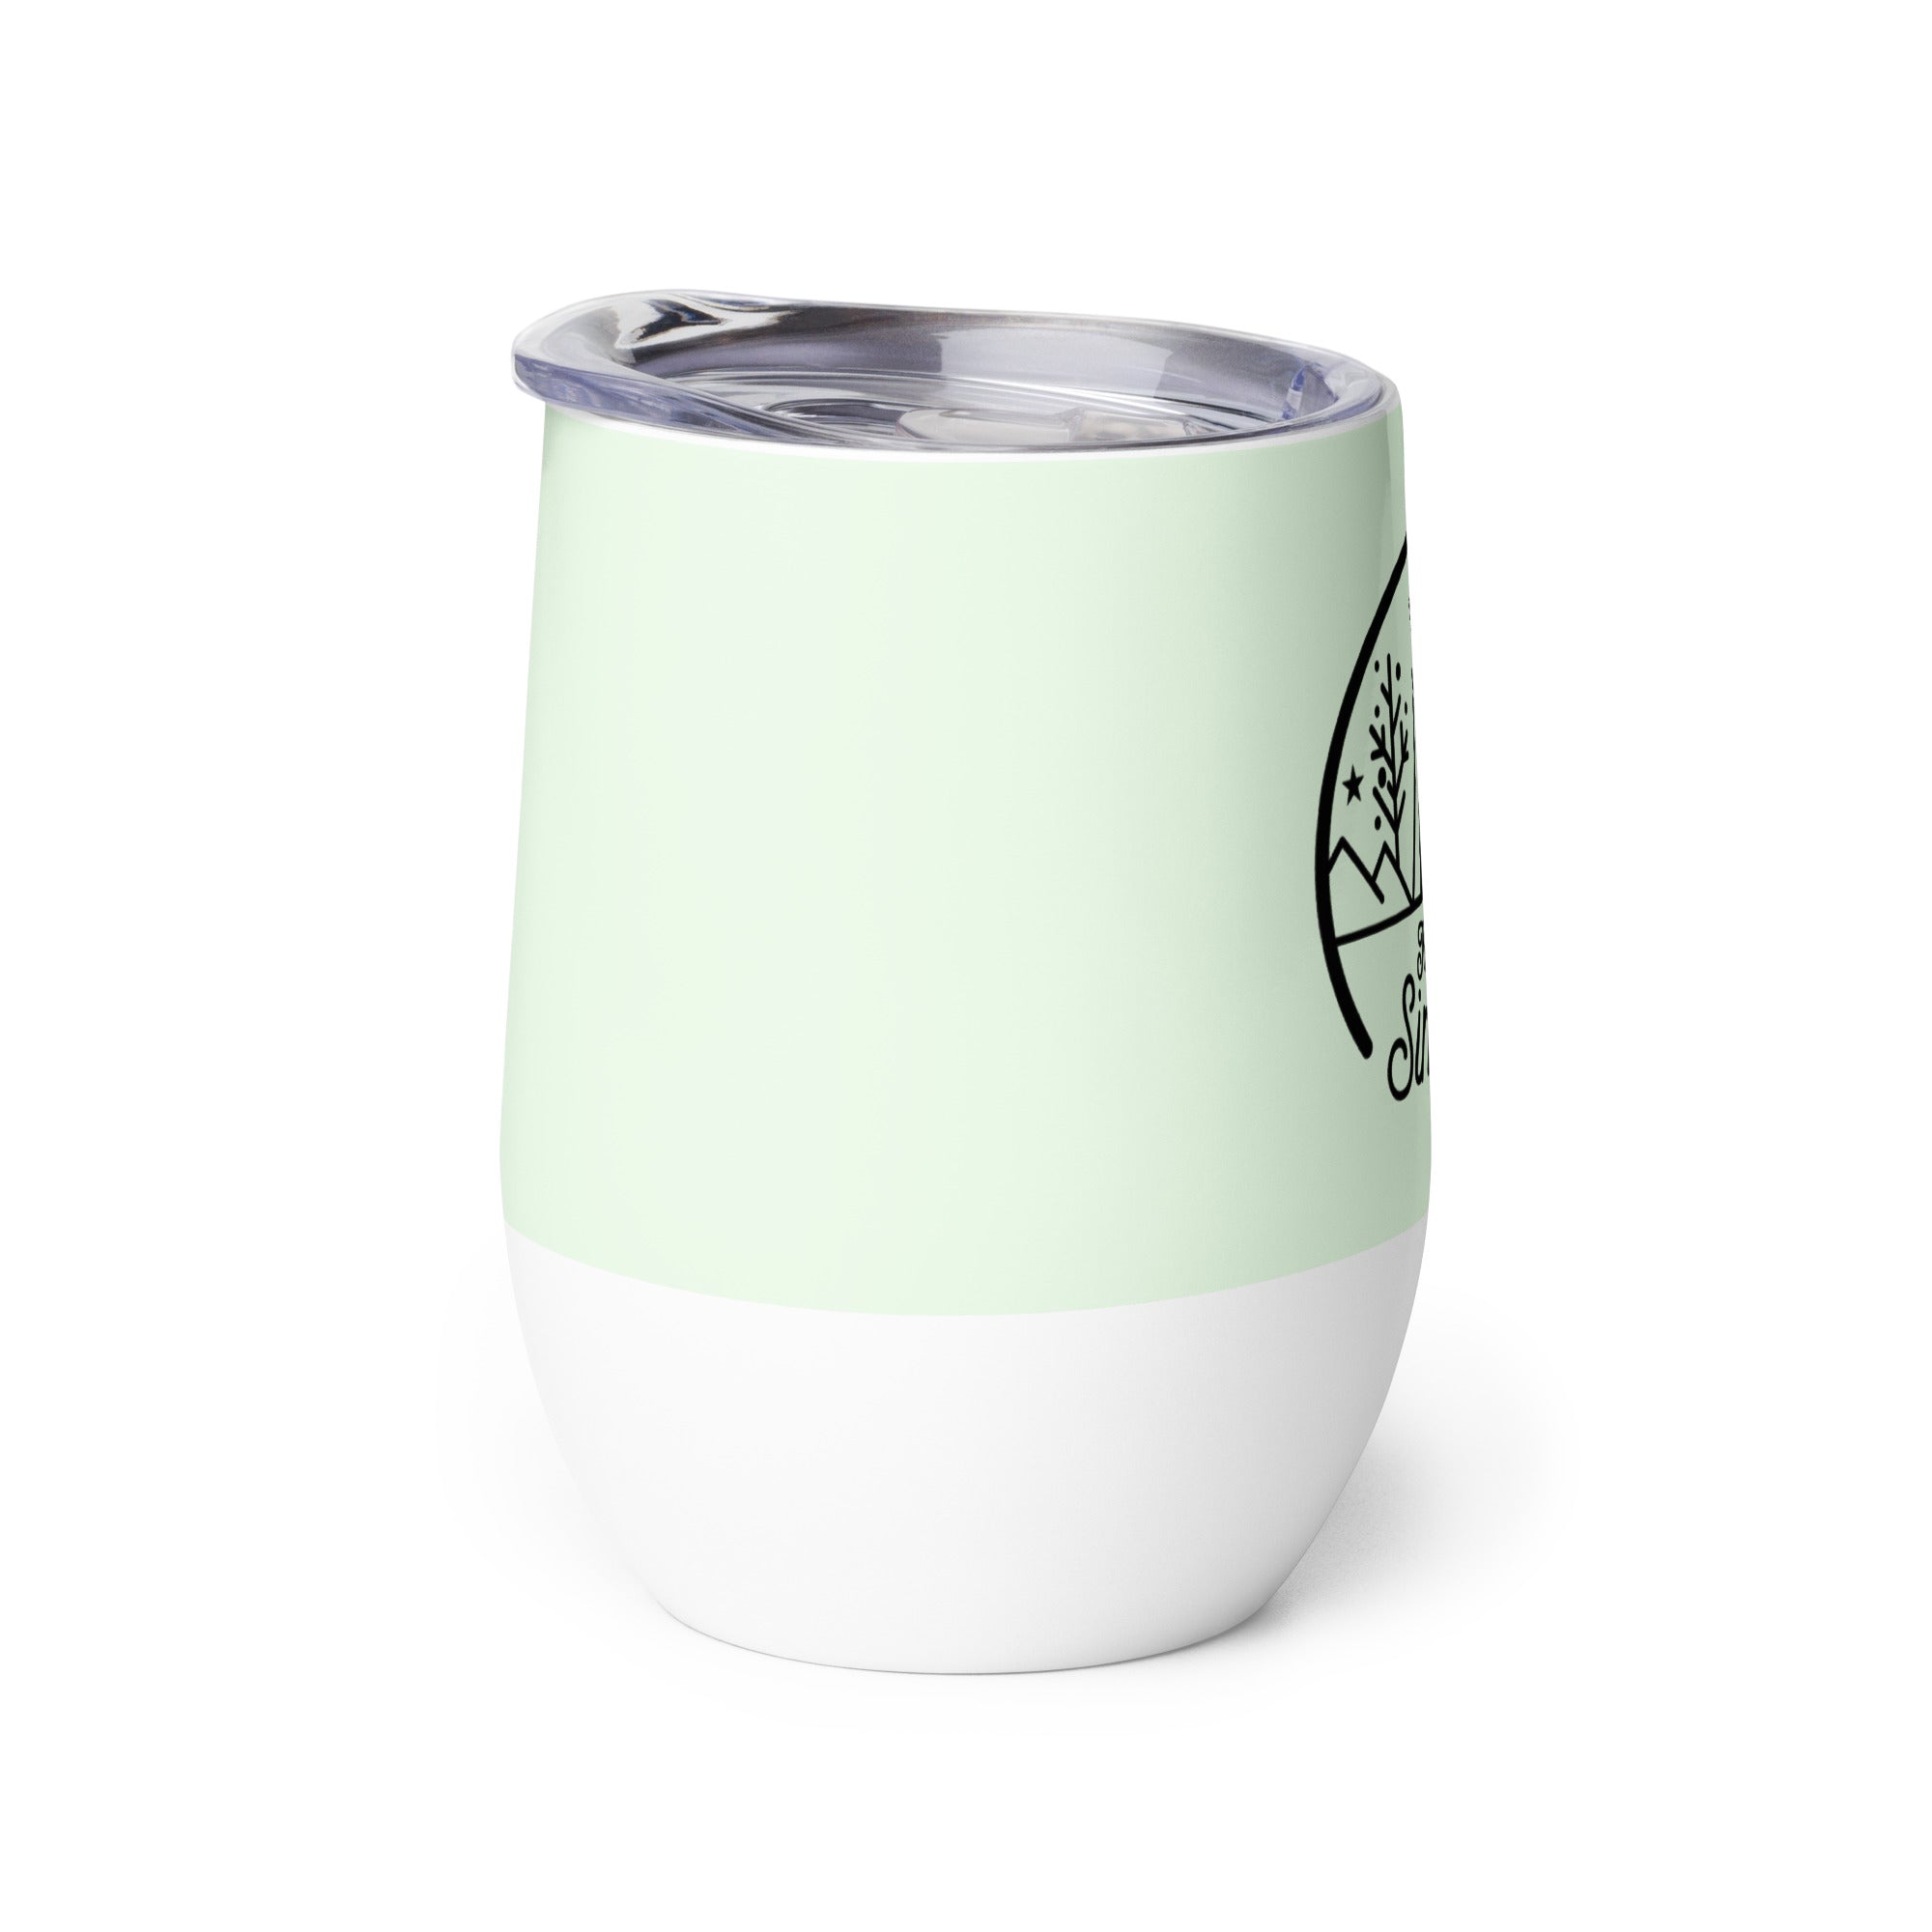 Keep it Simple: Minimalistic Wine Tumbler for Relaxed Gatherings